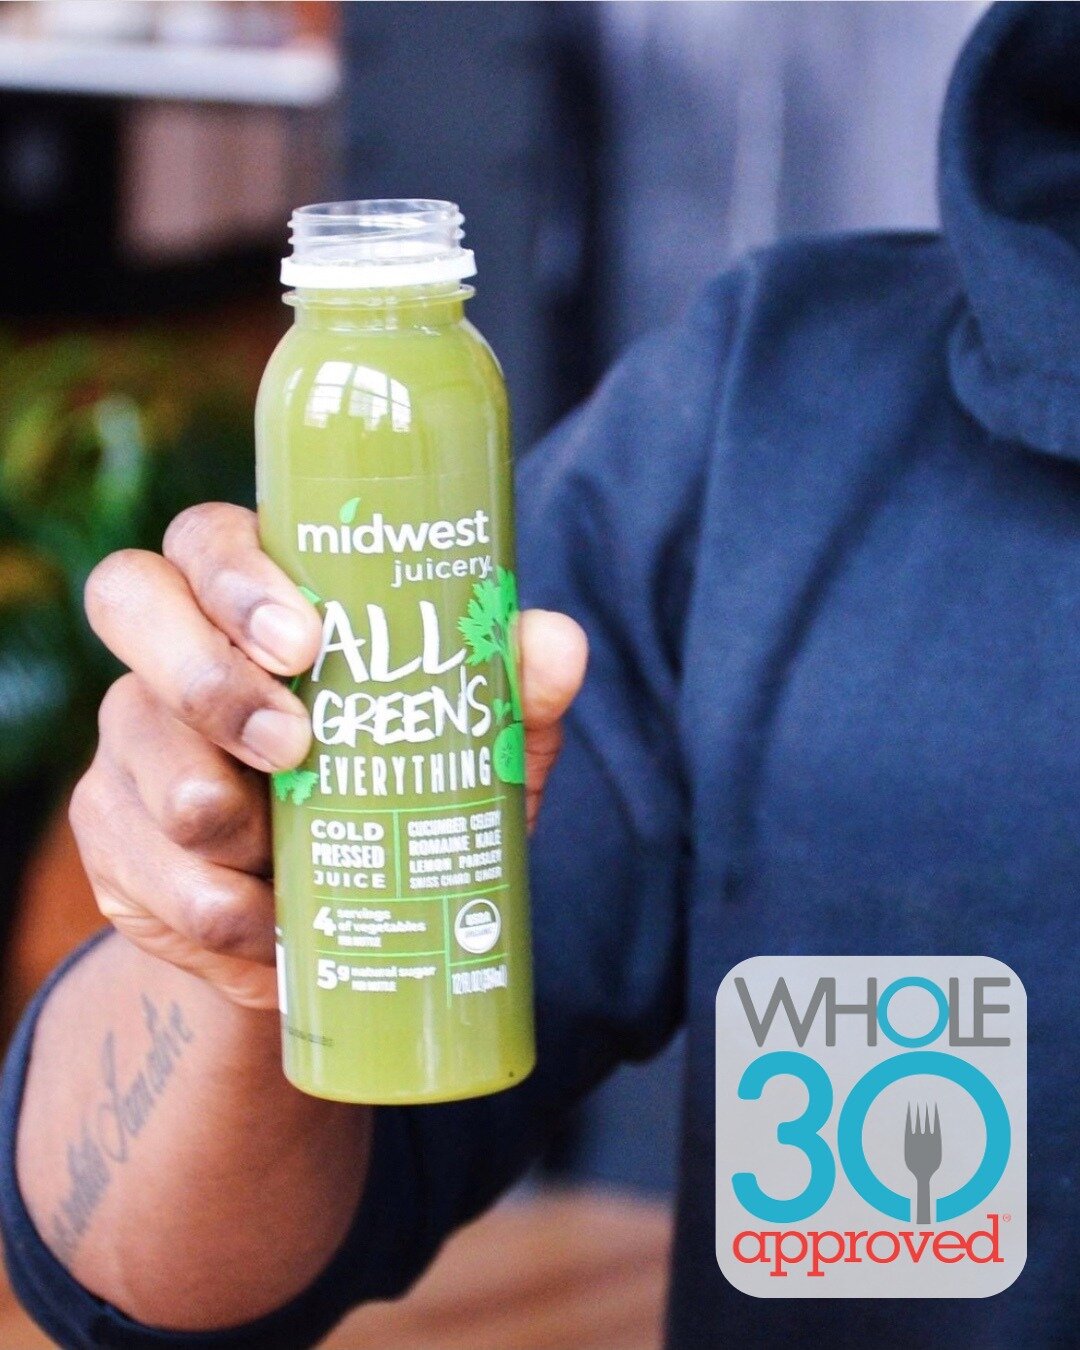 New to People's Food Co-op!!! Midwest Juicery is produced in Michigan and has 40% less sugar than other pressed juices. Stop into either location and pick one up today!